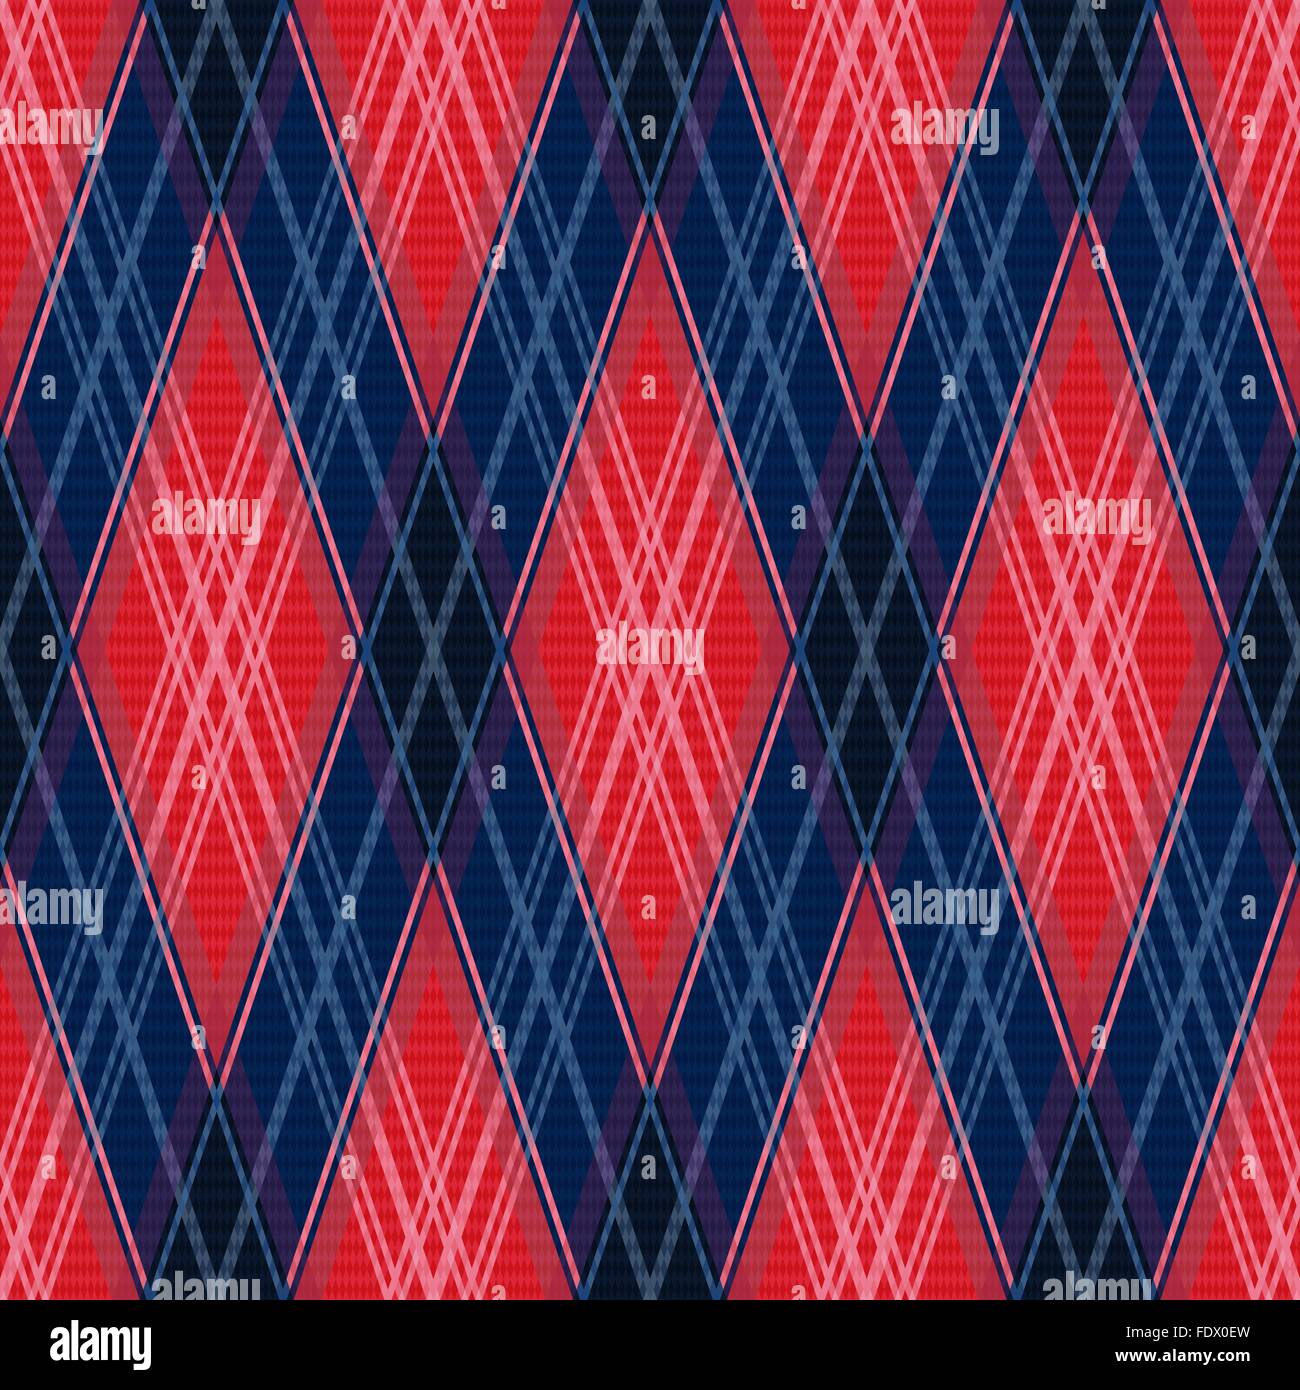 Rhombic contrast seamless vector pattern as a tartan plaid in red and blue colors Stock Vector